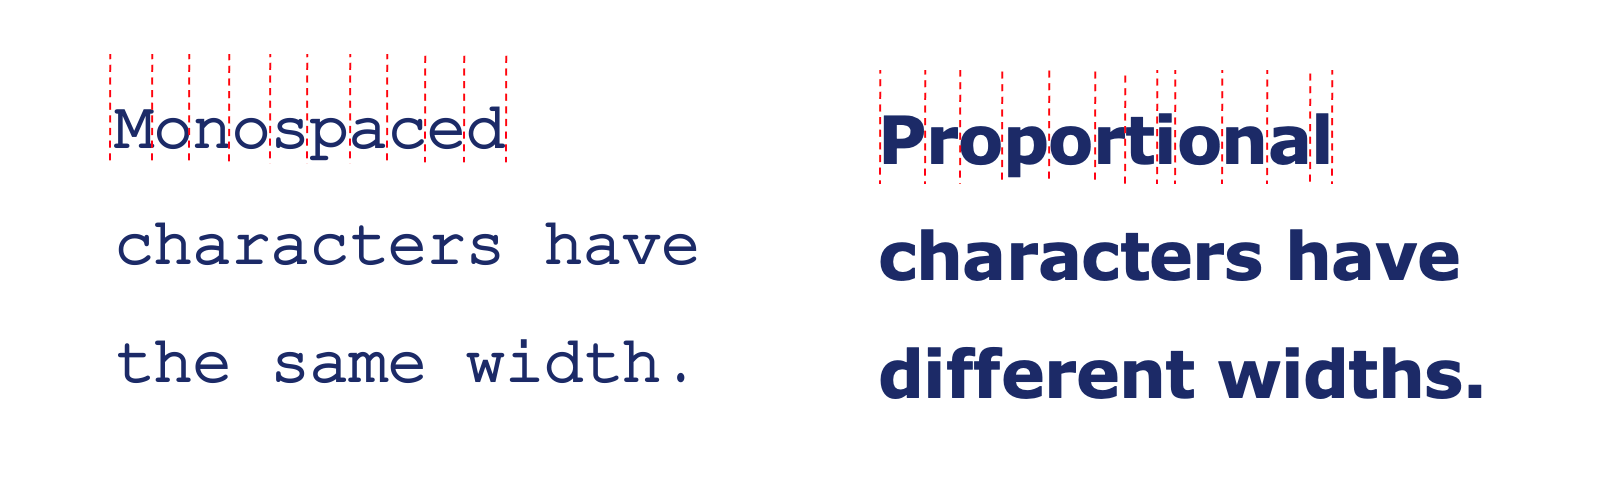 An example of monospaced text on the left that reads ‘Monospaced characters have the same width’ and text with proportional spacing on the right that reads ‘Proportional characters have different widths’.